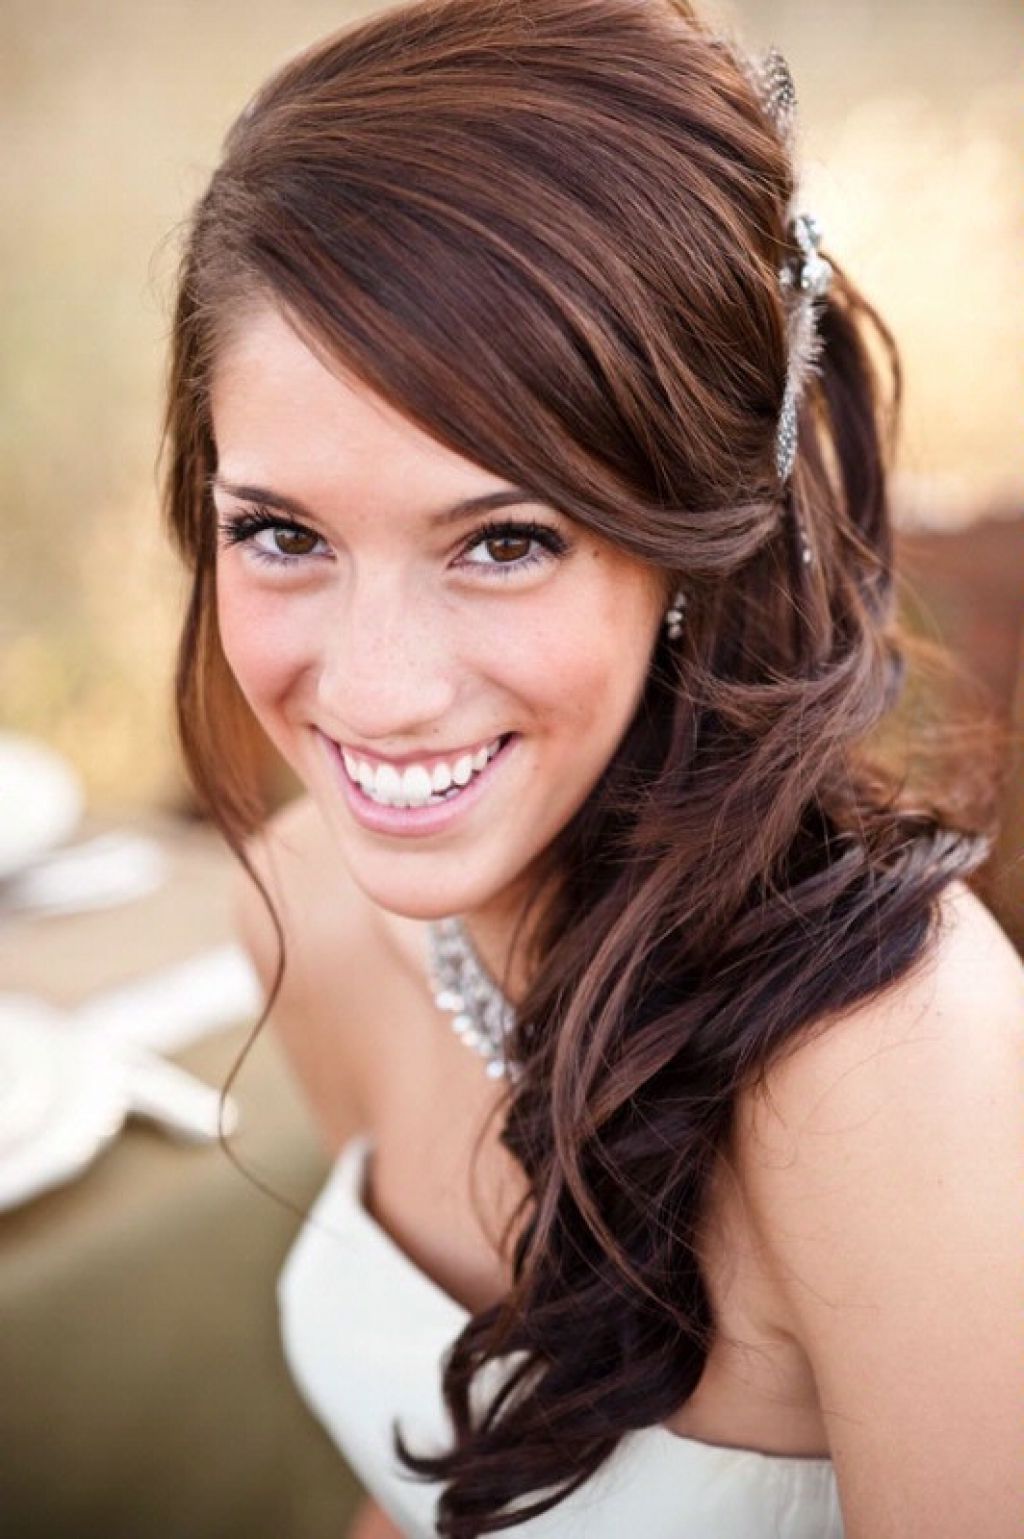 Favorite Wedding Hairstyles On The Side With Curls Regarding Swept Side Ponytail Wedding Hairstyles For Long Hair Ideas Stock (View 7 of 15)